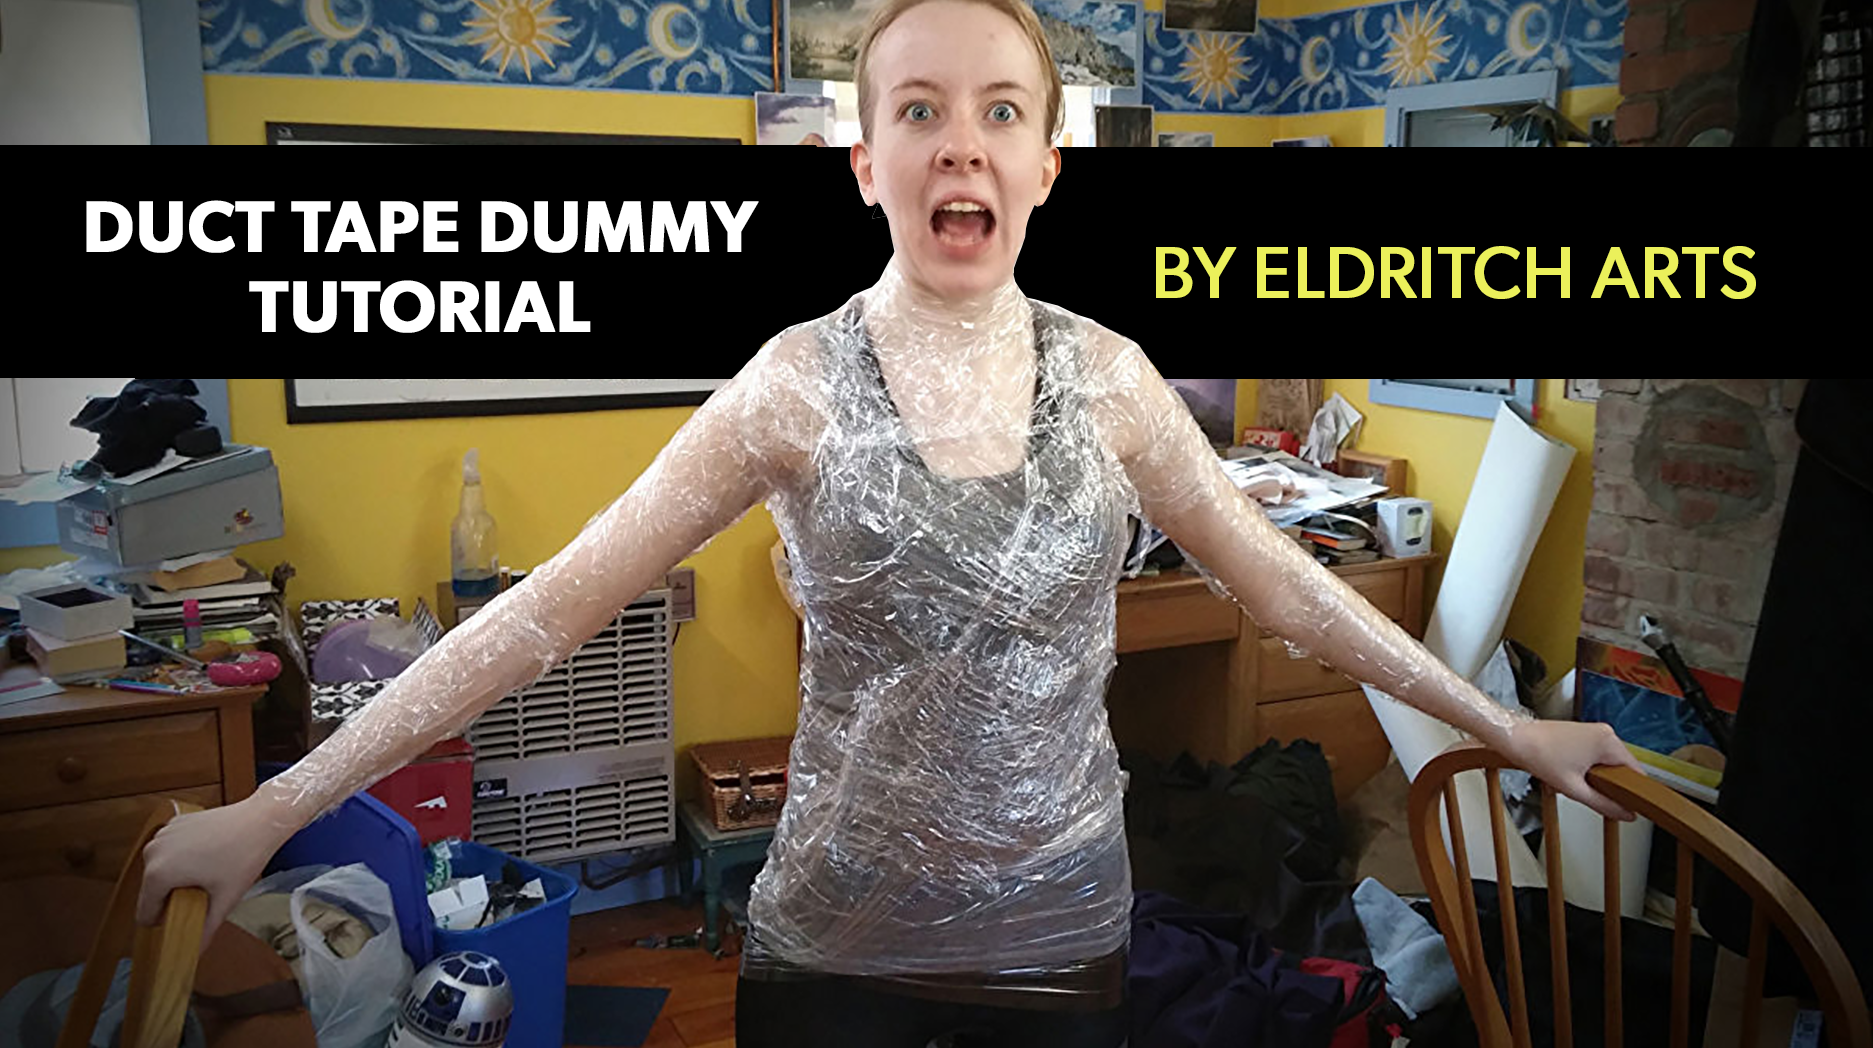 Duct Tape Dummy tutorial from Eldritch Arts